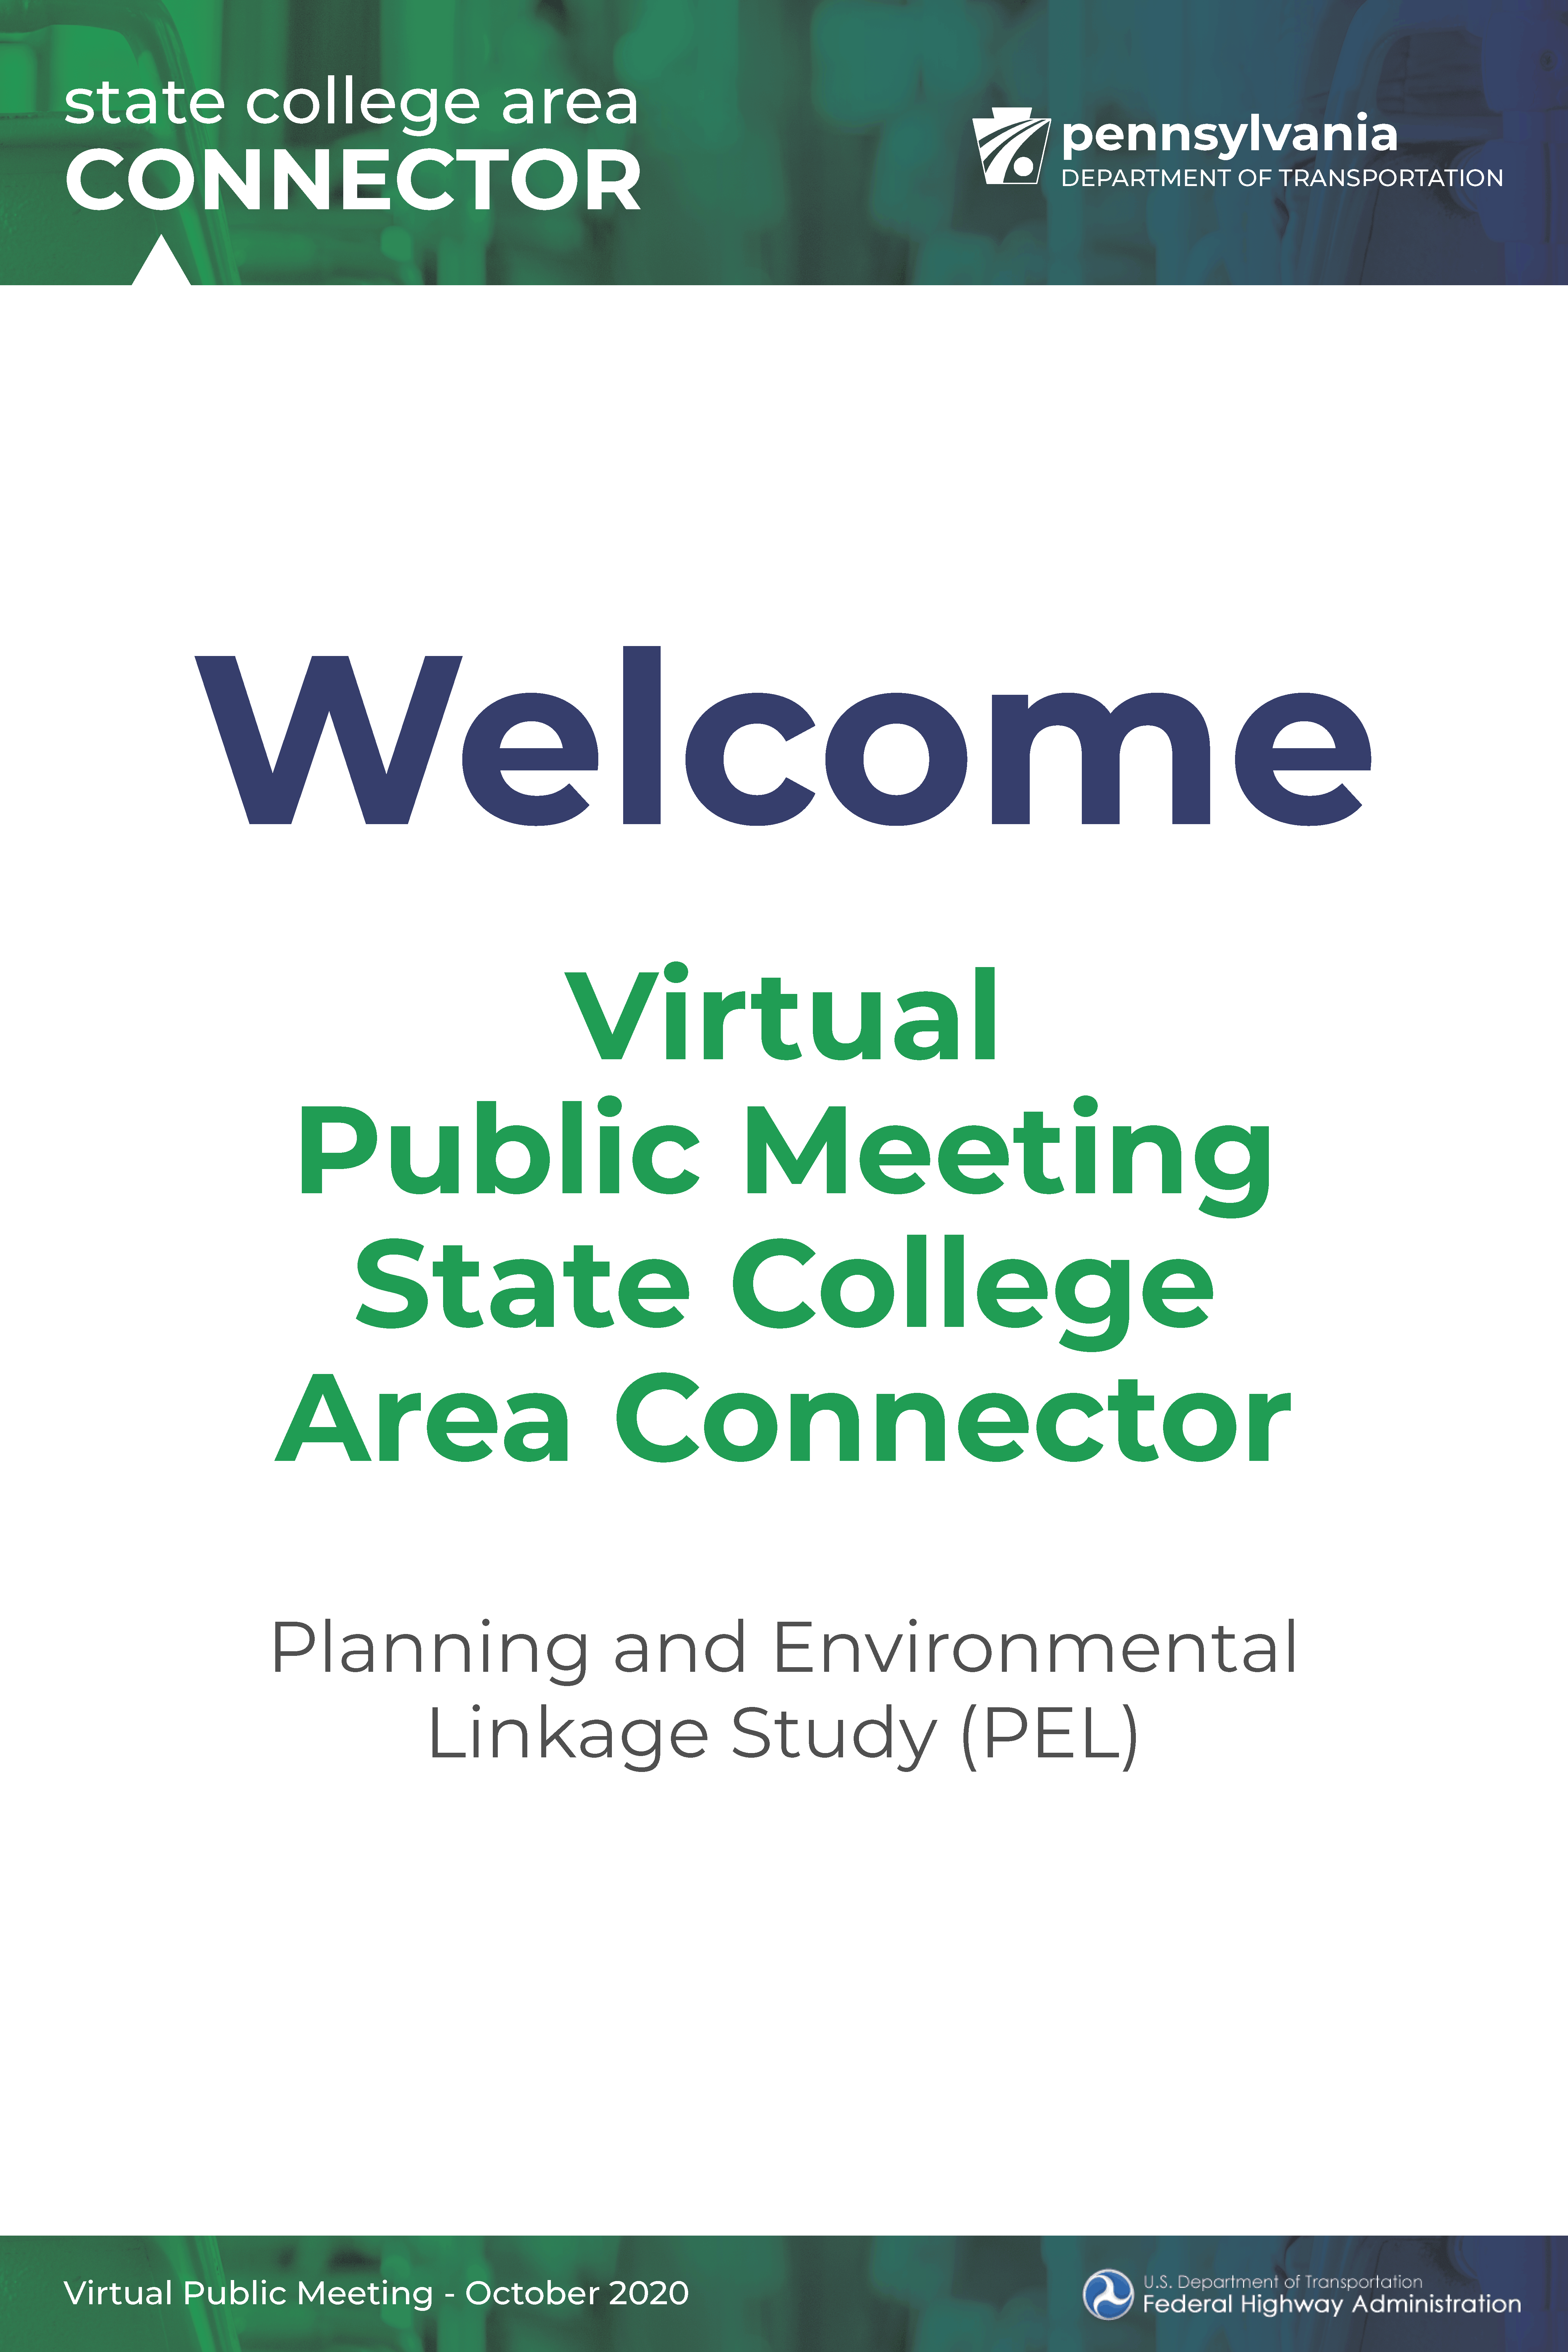 Welcome slide for the State College Area Connector virtual meeting